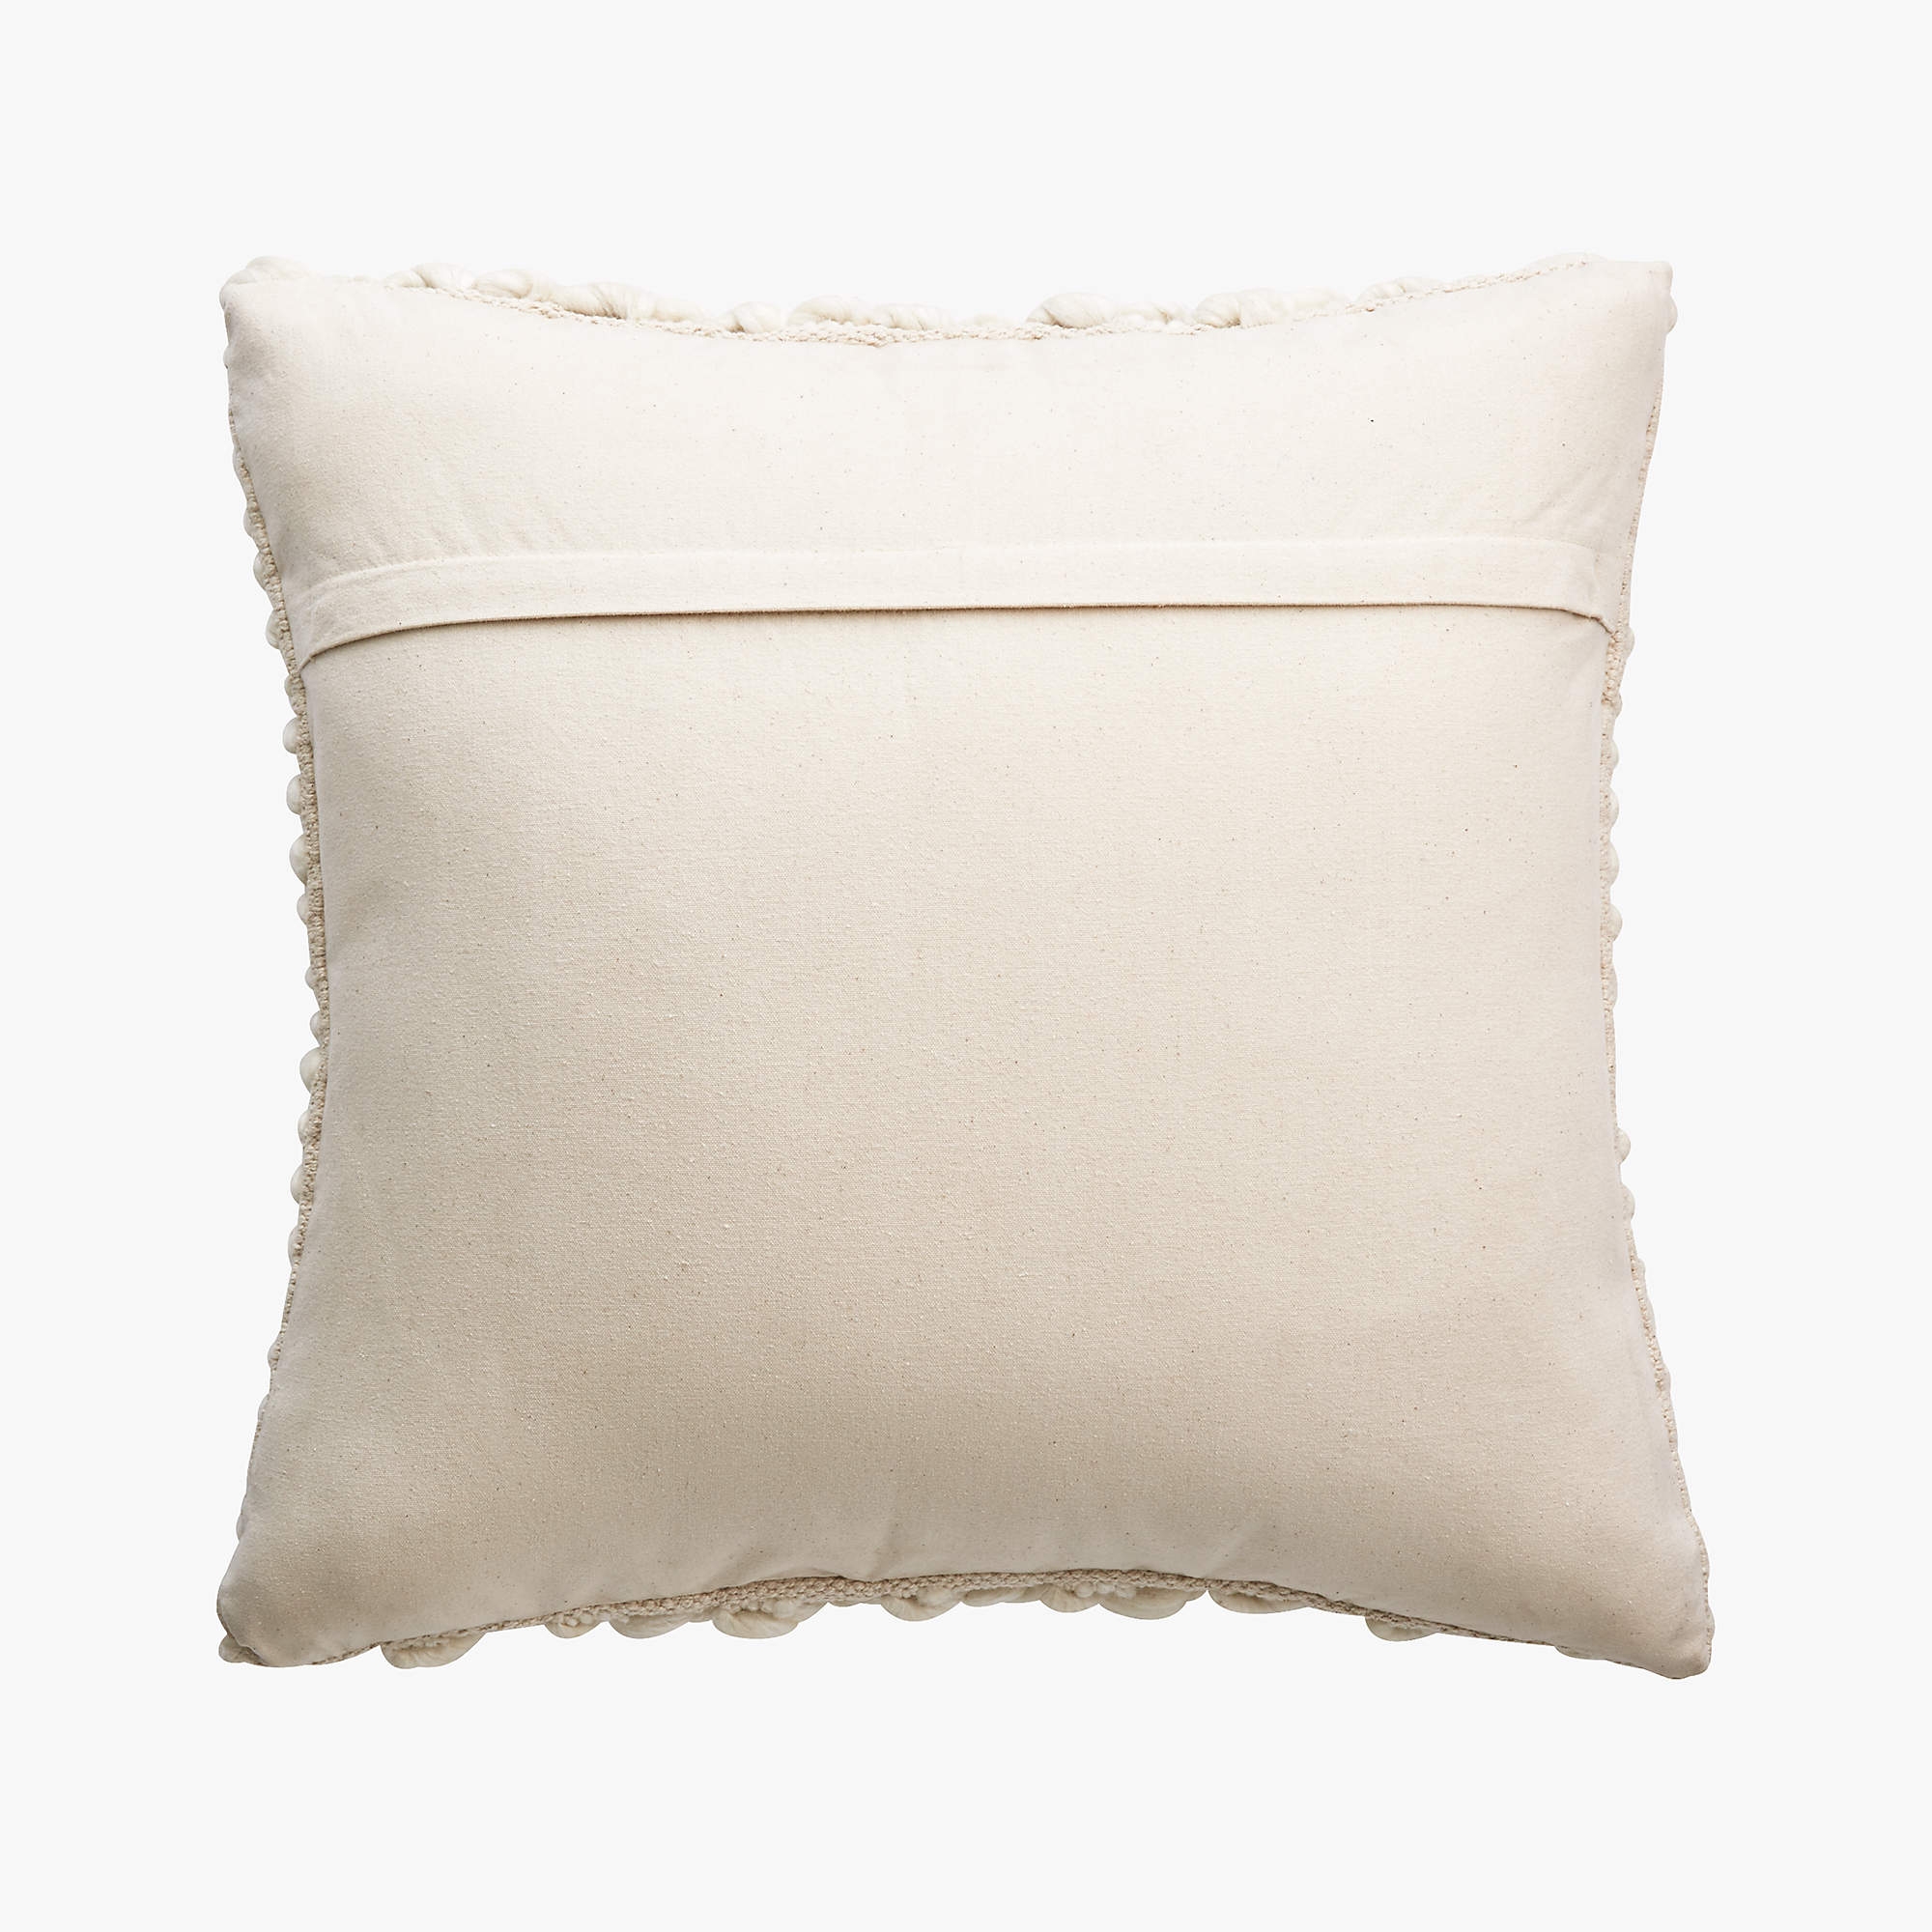 Tillie Wool Pillow, Ivory, 20" x 20" Feather-Down Insert - Image 3